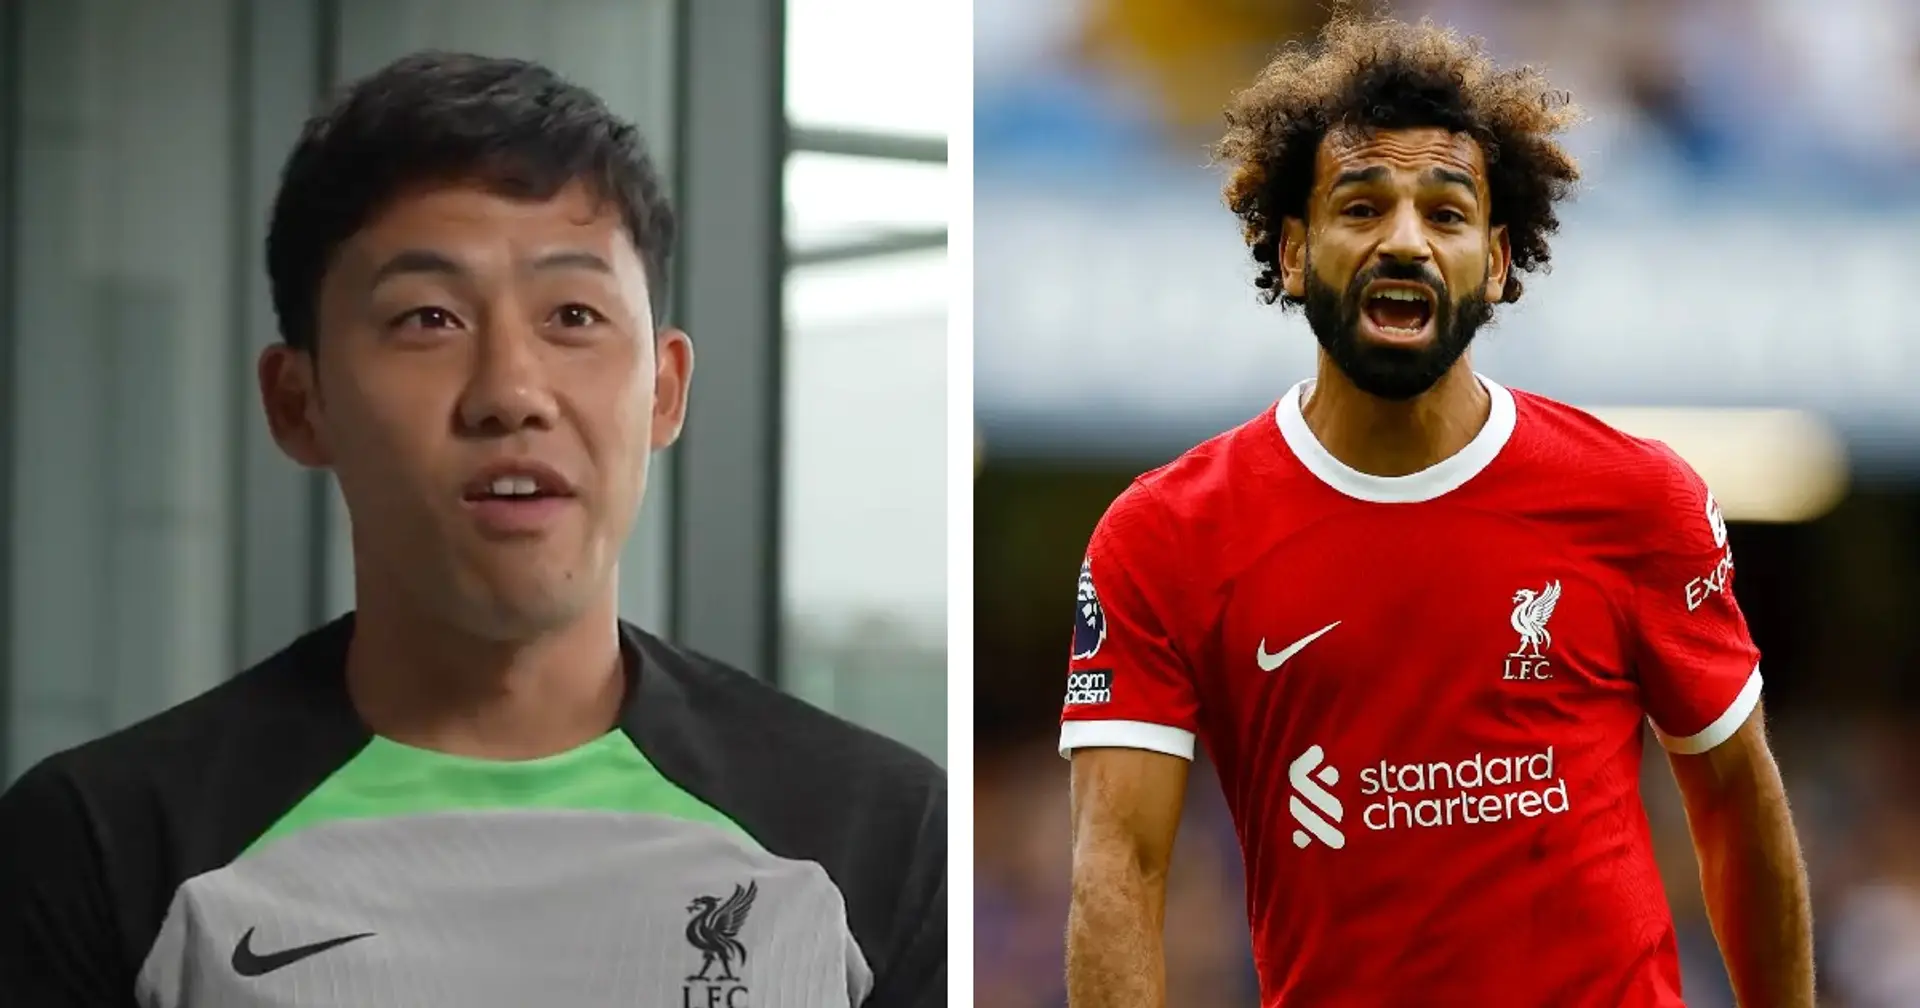 'He is very powerful': Endo names one Liverpool player who impressed him the most – not Salah